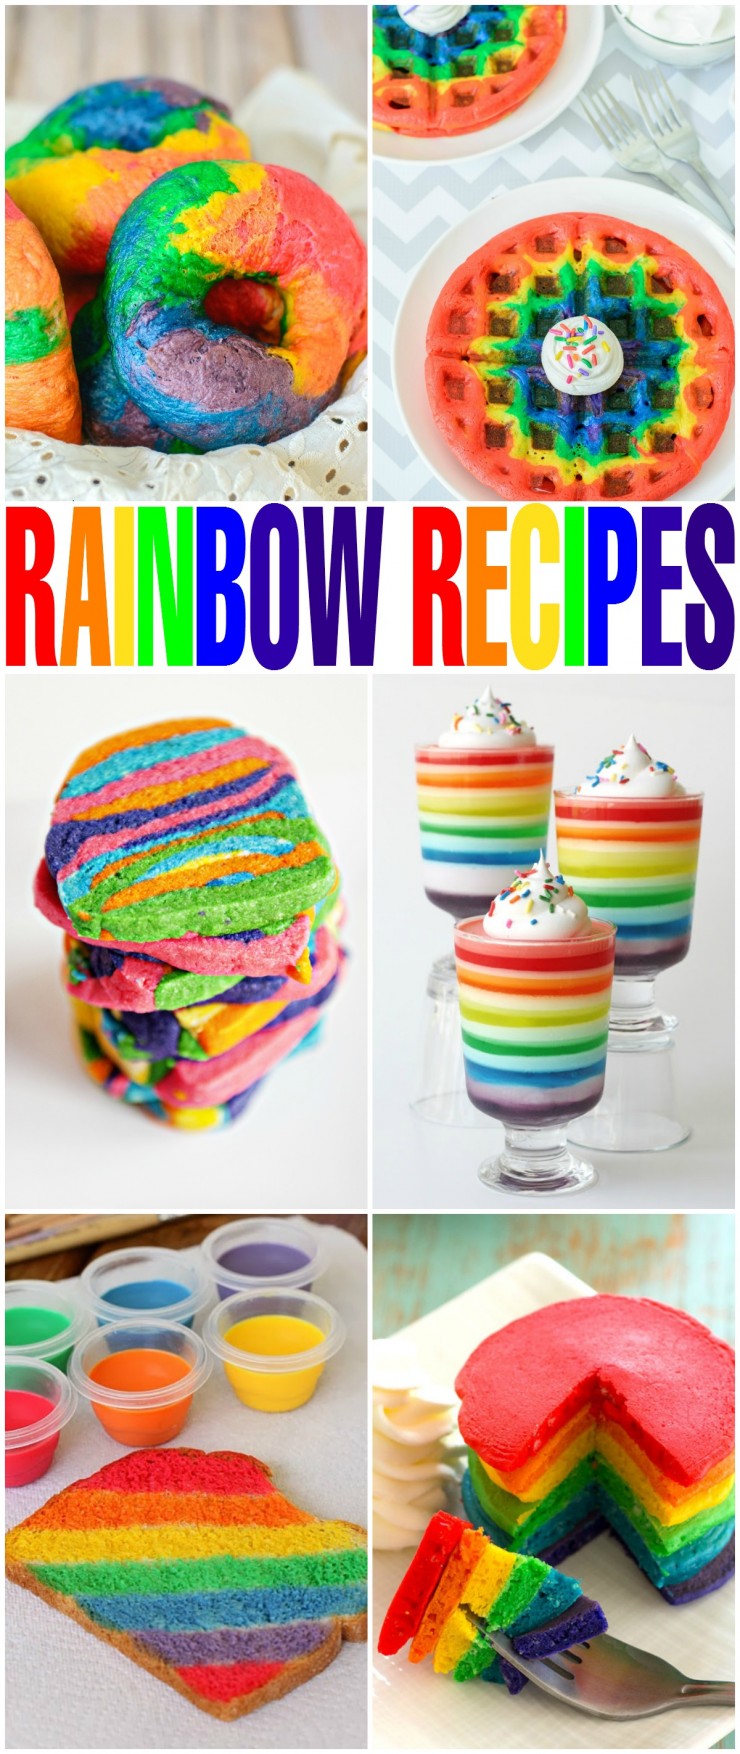 These 20 Vibrant Rainbow Recipes are just so much fun. These are some great ideas for St. Patrick's day celebrations or just because fun for kids!